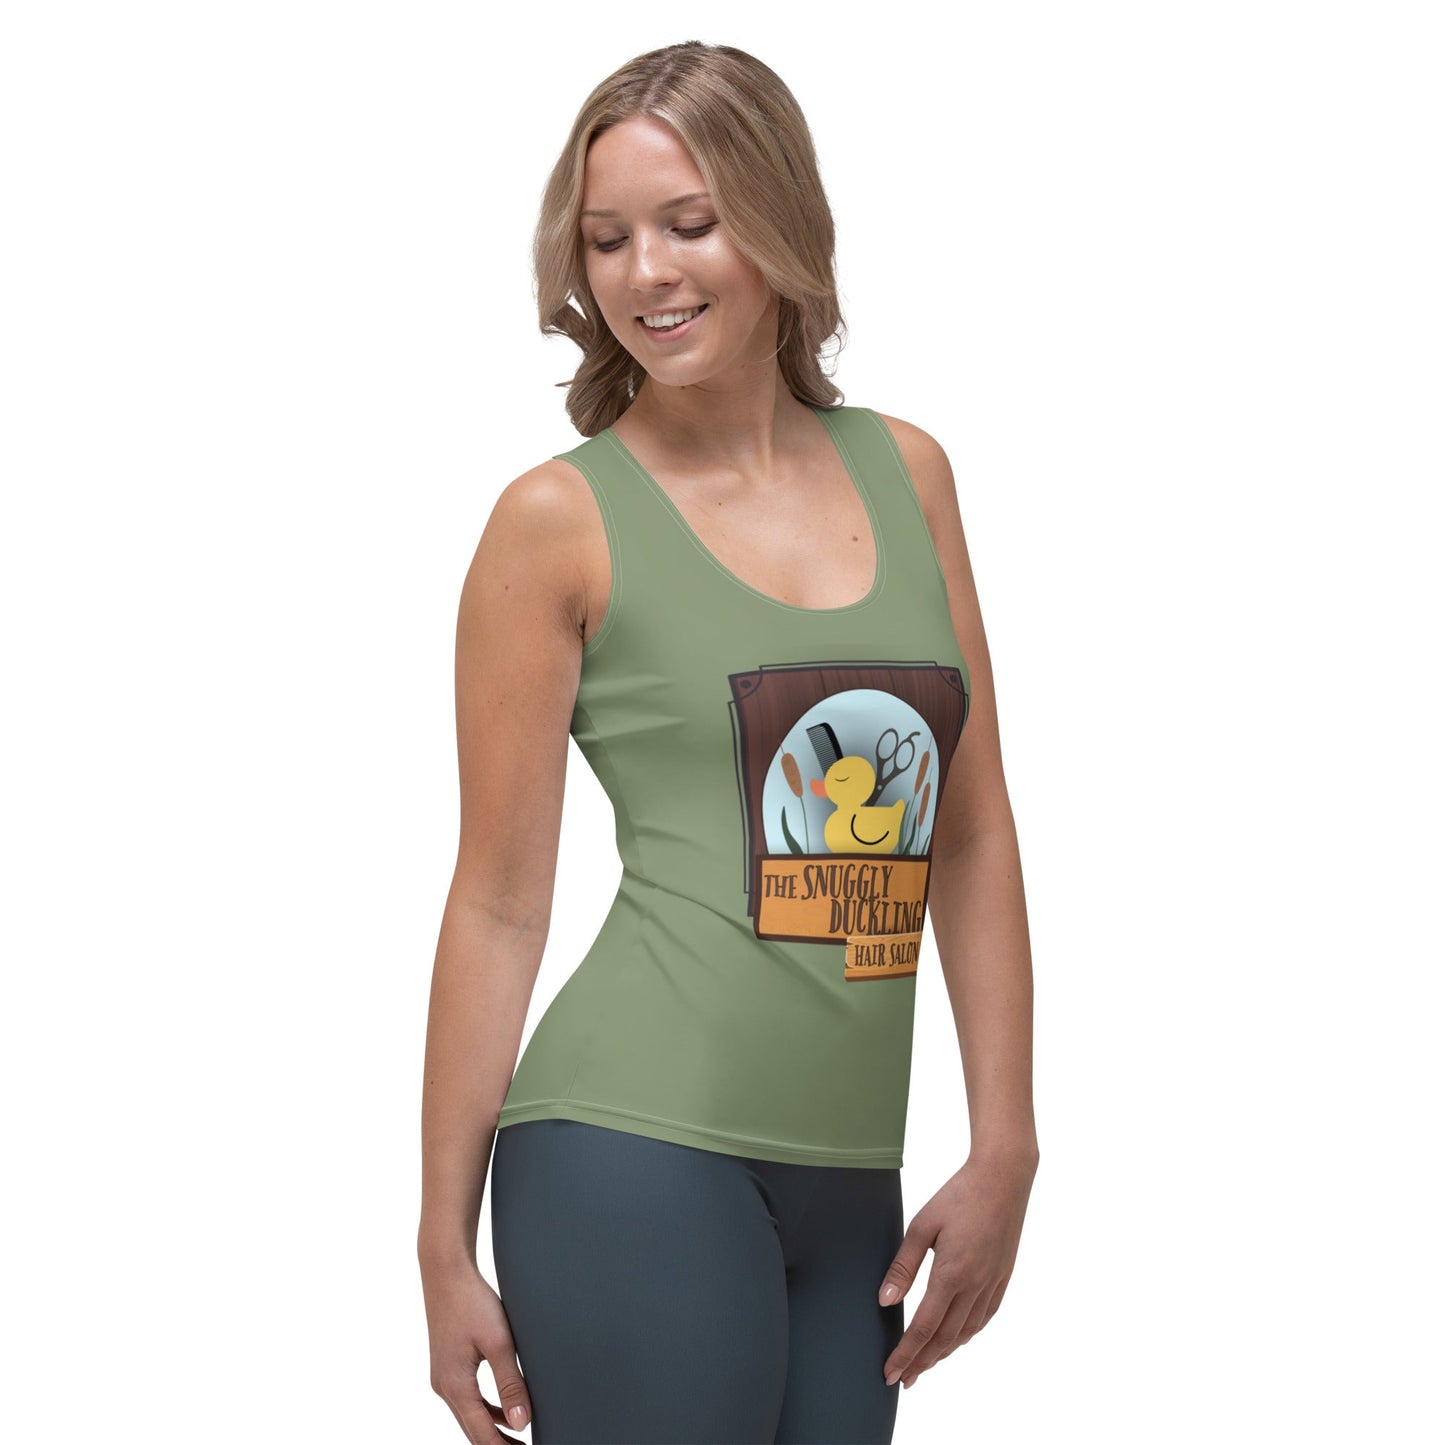 Snuggly Duckling Salon Tank Top adult tangledall day disneyAdult T-ShirtWrong Lever Clothing